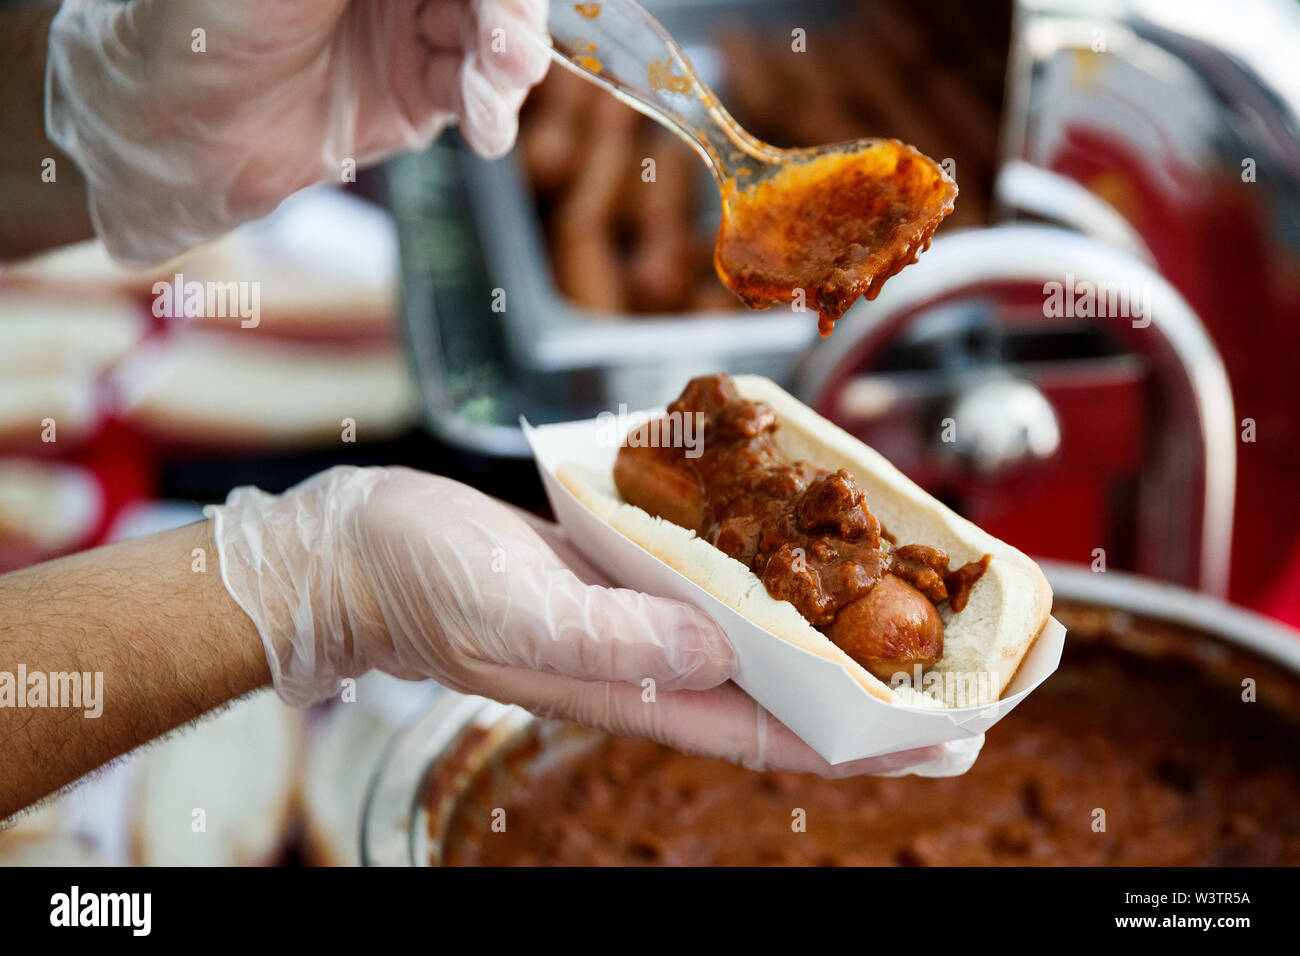 Washington, USA. 17th July, 2019. A vendor prepares a hot dog during the annual Hot Dog Lunch event at the Rayburn House Office Building on Capitol Hill in Washington, DC, the United States, on July 17, 2019. The event was held here on Wednesday in celebration of the National Hot Dog Day. Credit: Ting Shen/Xinhua/Alamy Live News Stock Photo